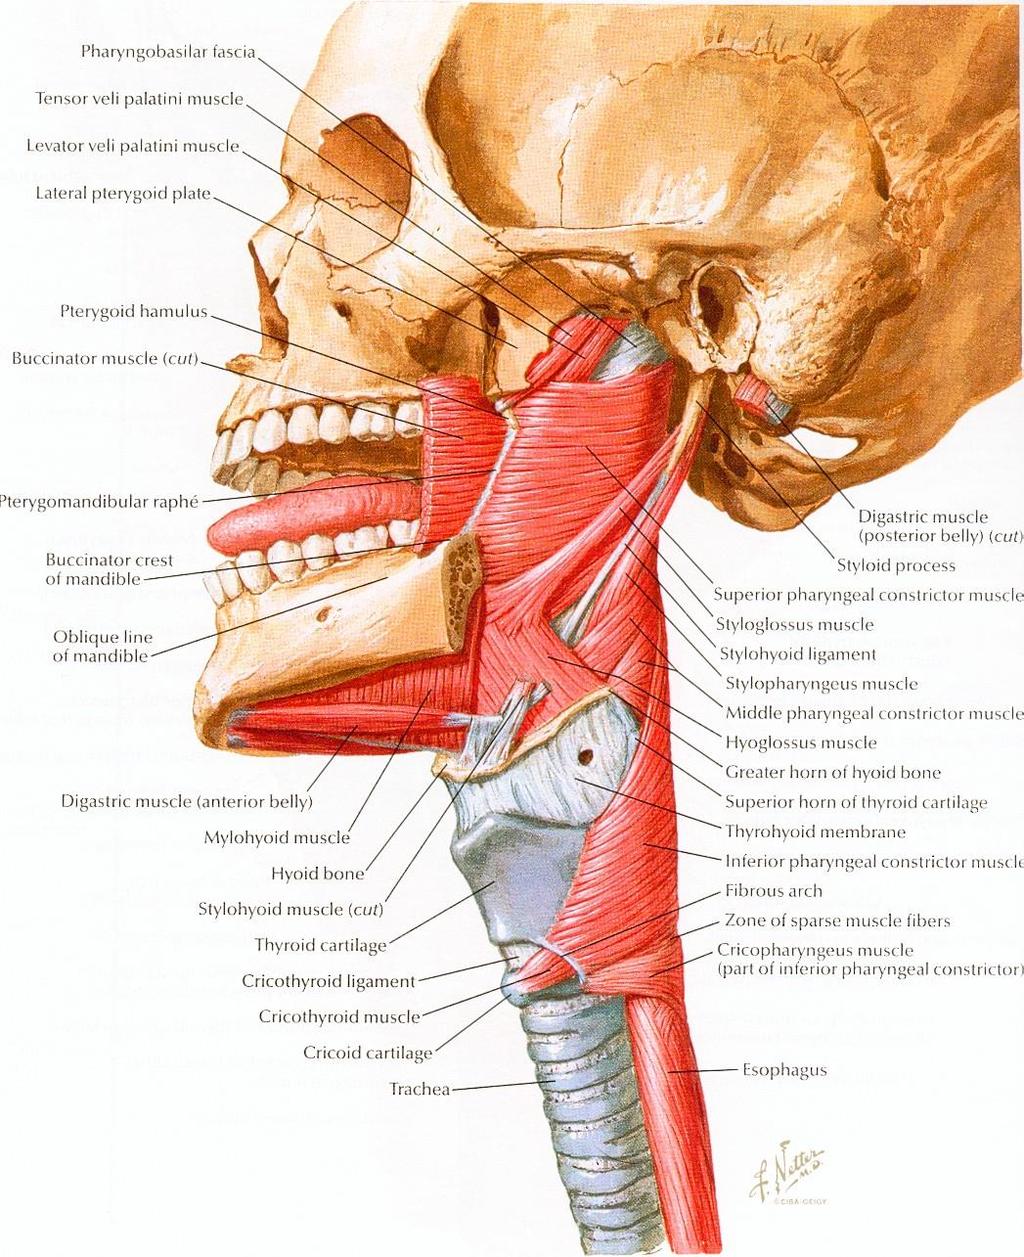 Upper esophageal sphincter = cricopharyngeal muscle Innervation : nerve X Cricopharyngeal muscle: - contracted and tonic at rest.